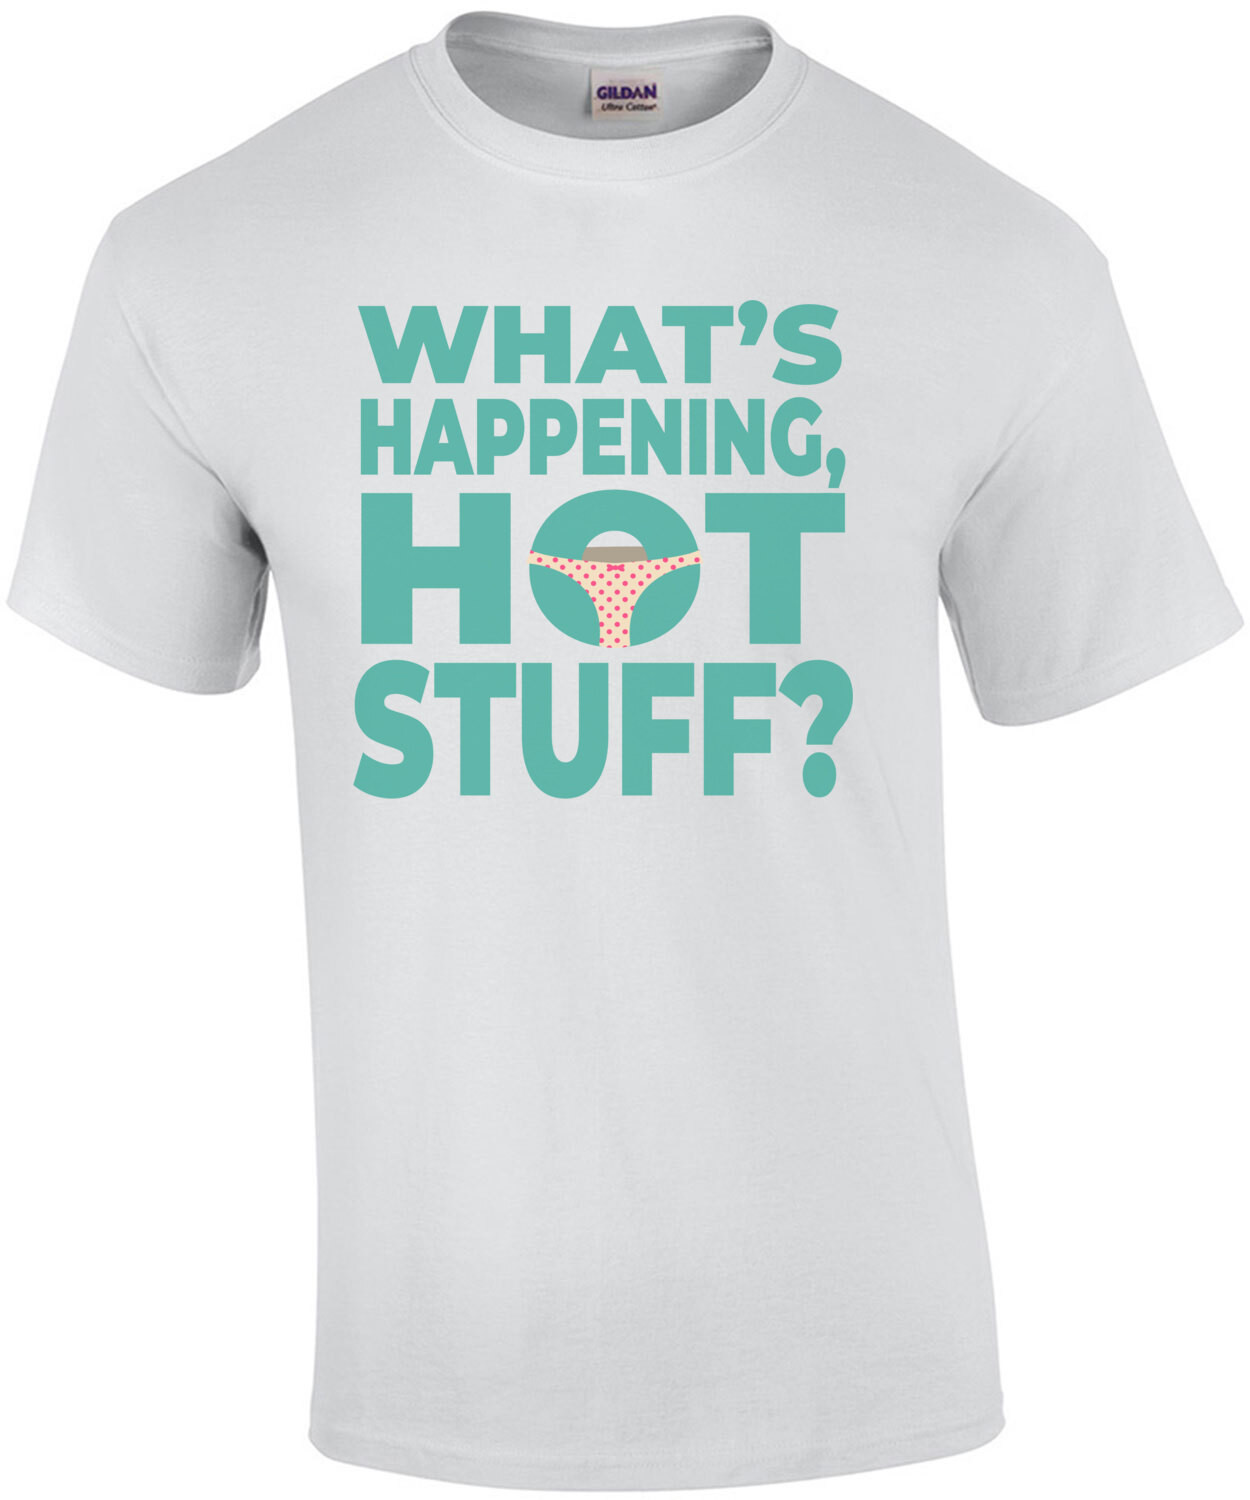 What's Happening hot stuff - Sixteen Candles - 80's t-shirt